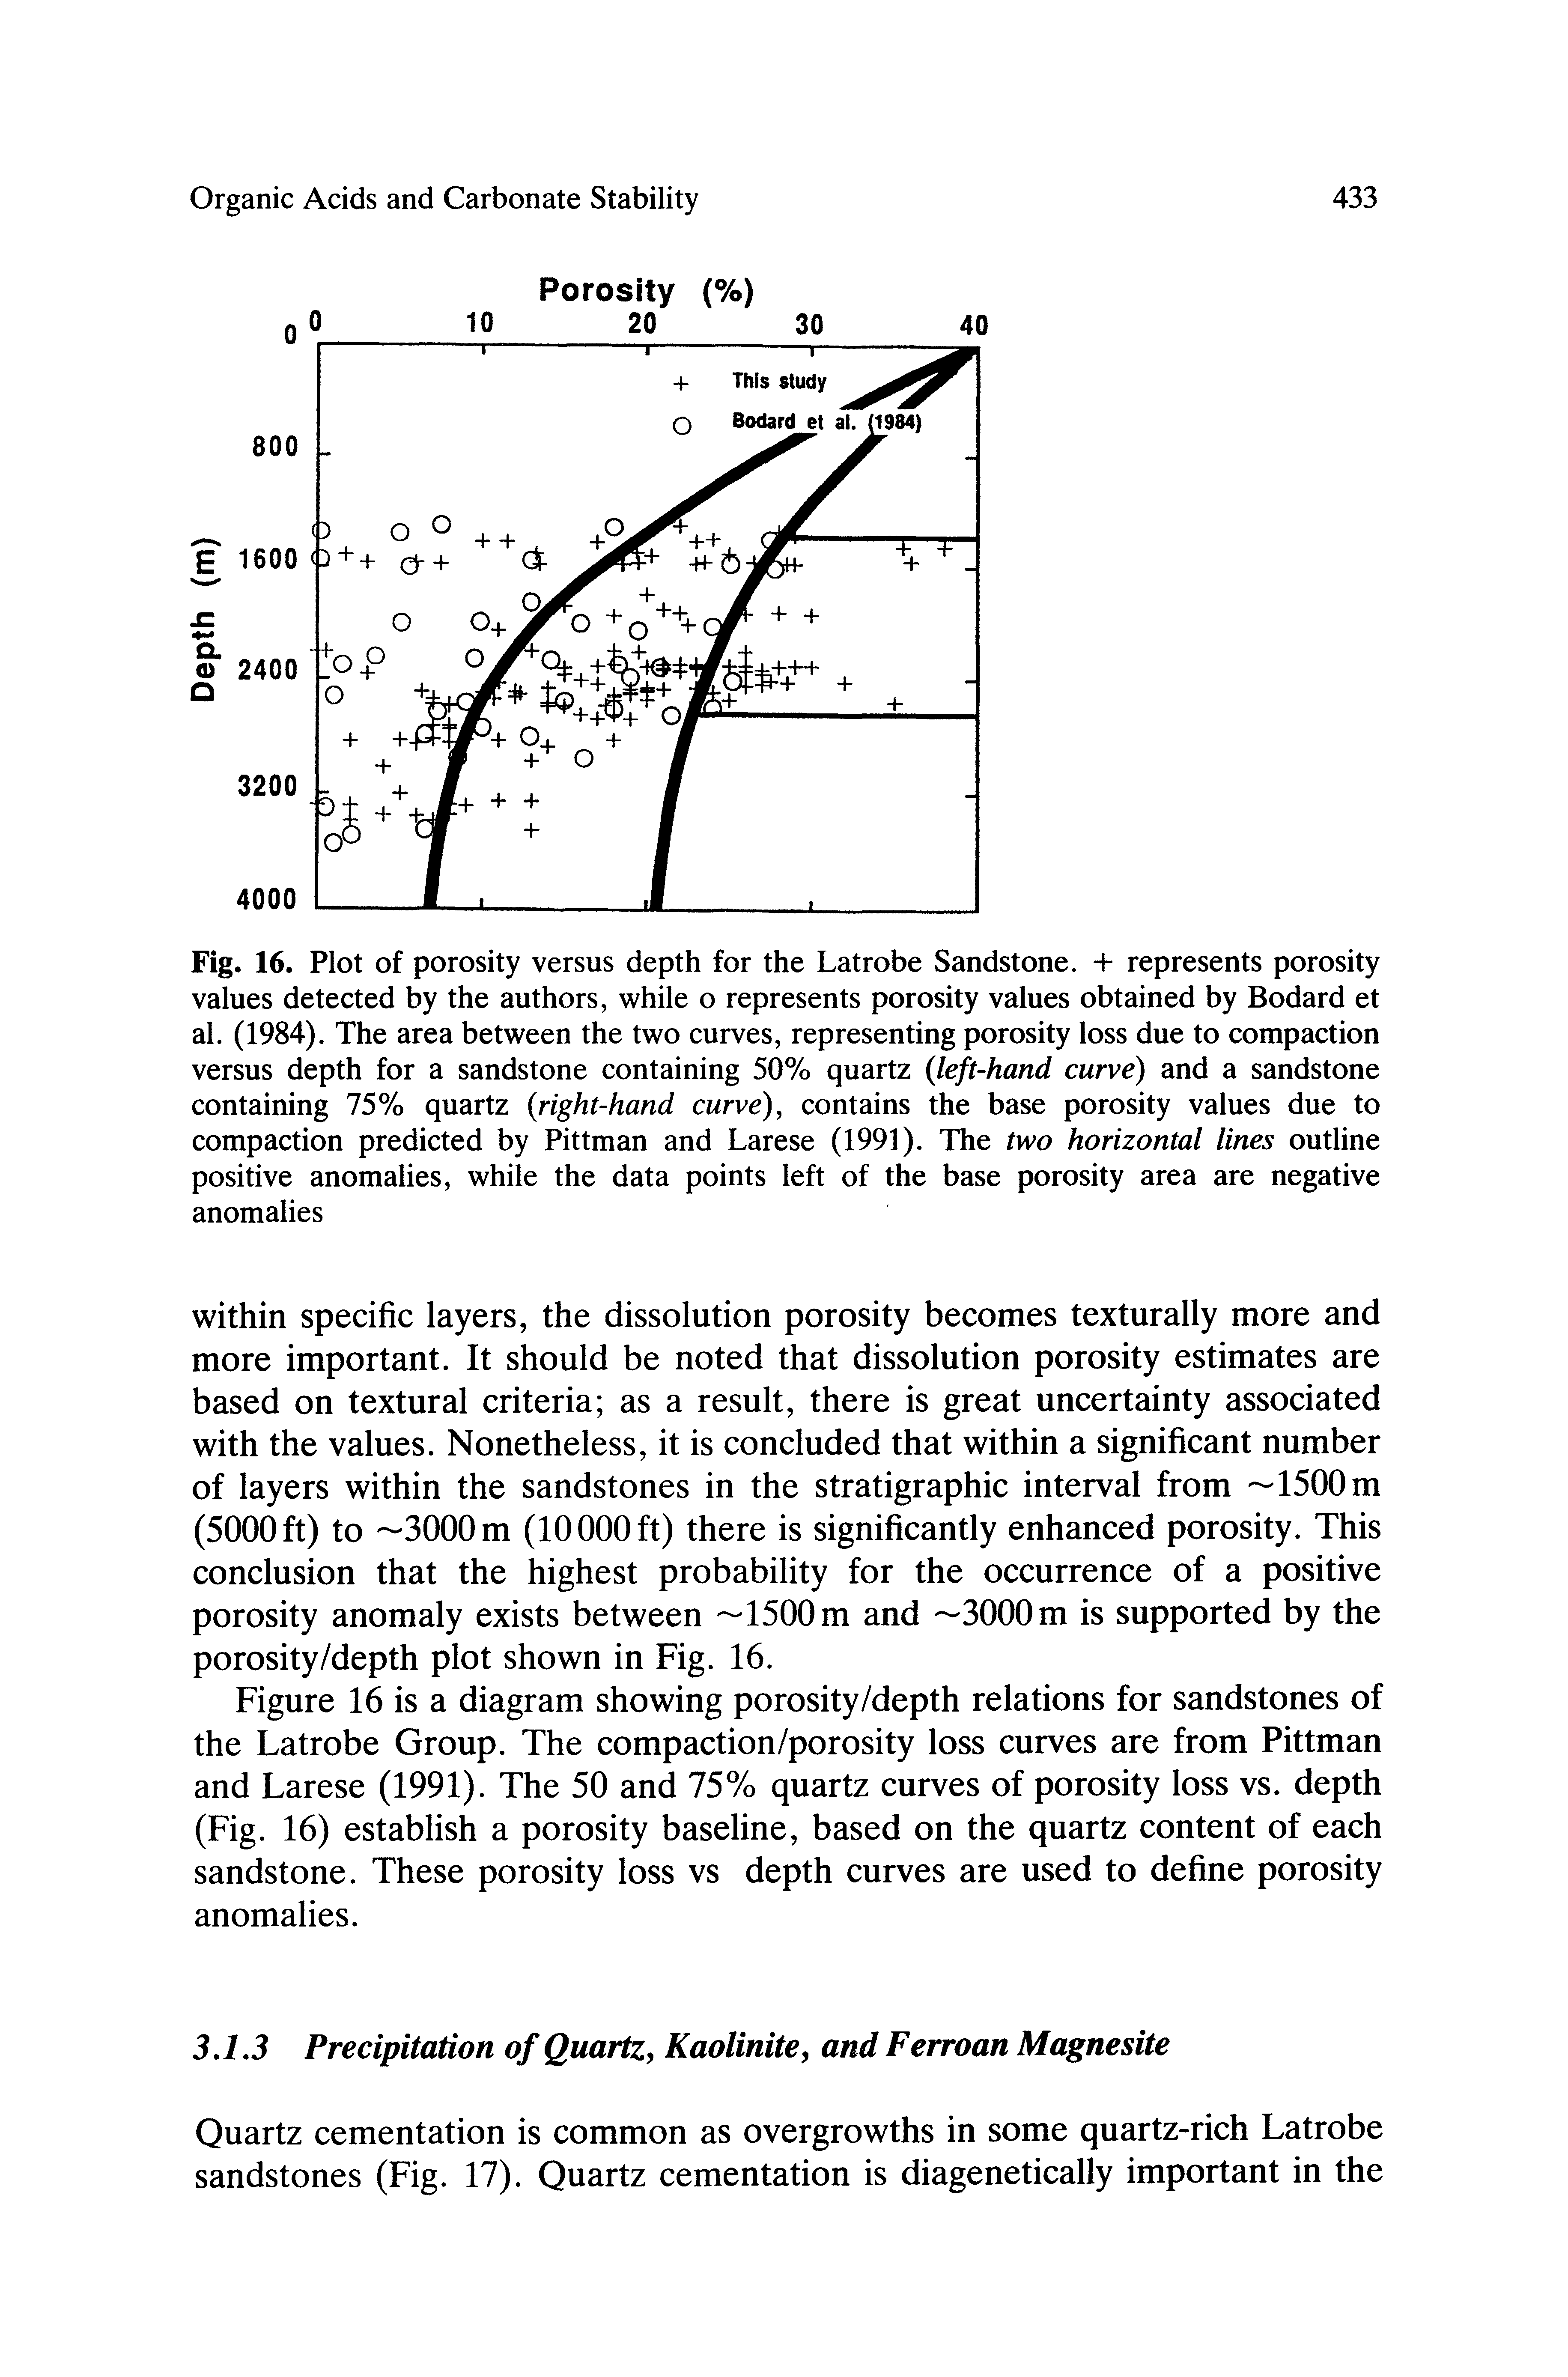 Fig. 16. Plot of porosity versus depth for the Latrobe Sandstone. + represents porosity values detected by the authors, while o represents porosity values obtained by Bodard et al. (1984), The area between the two curves, representing porosity loss due to compaction versus depth for a sandstone containing 50% quartz left-hand curve) and a sandstone containing 75% quartz right-hand curve), contains the base porosity values due to compaction predicted by Pittman and Larese (1991). The two horizontal lines outline positive anomalies, while the data points left of the base porosity area are negative anomalies...